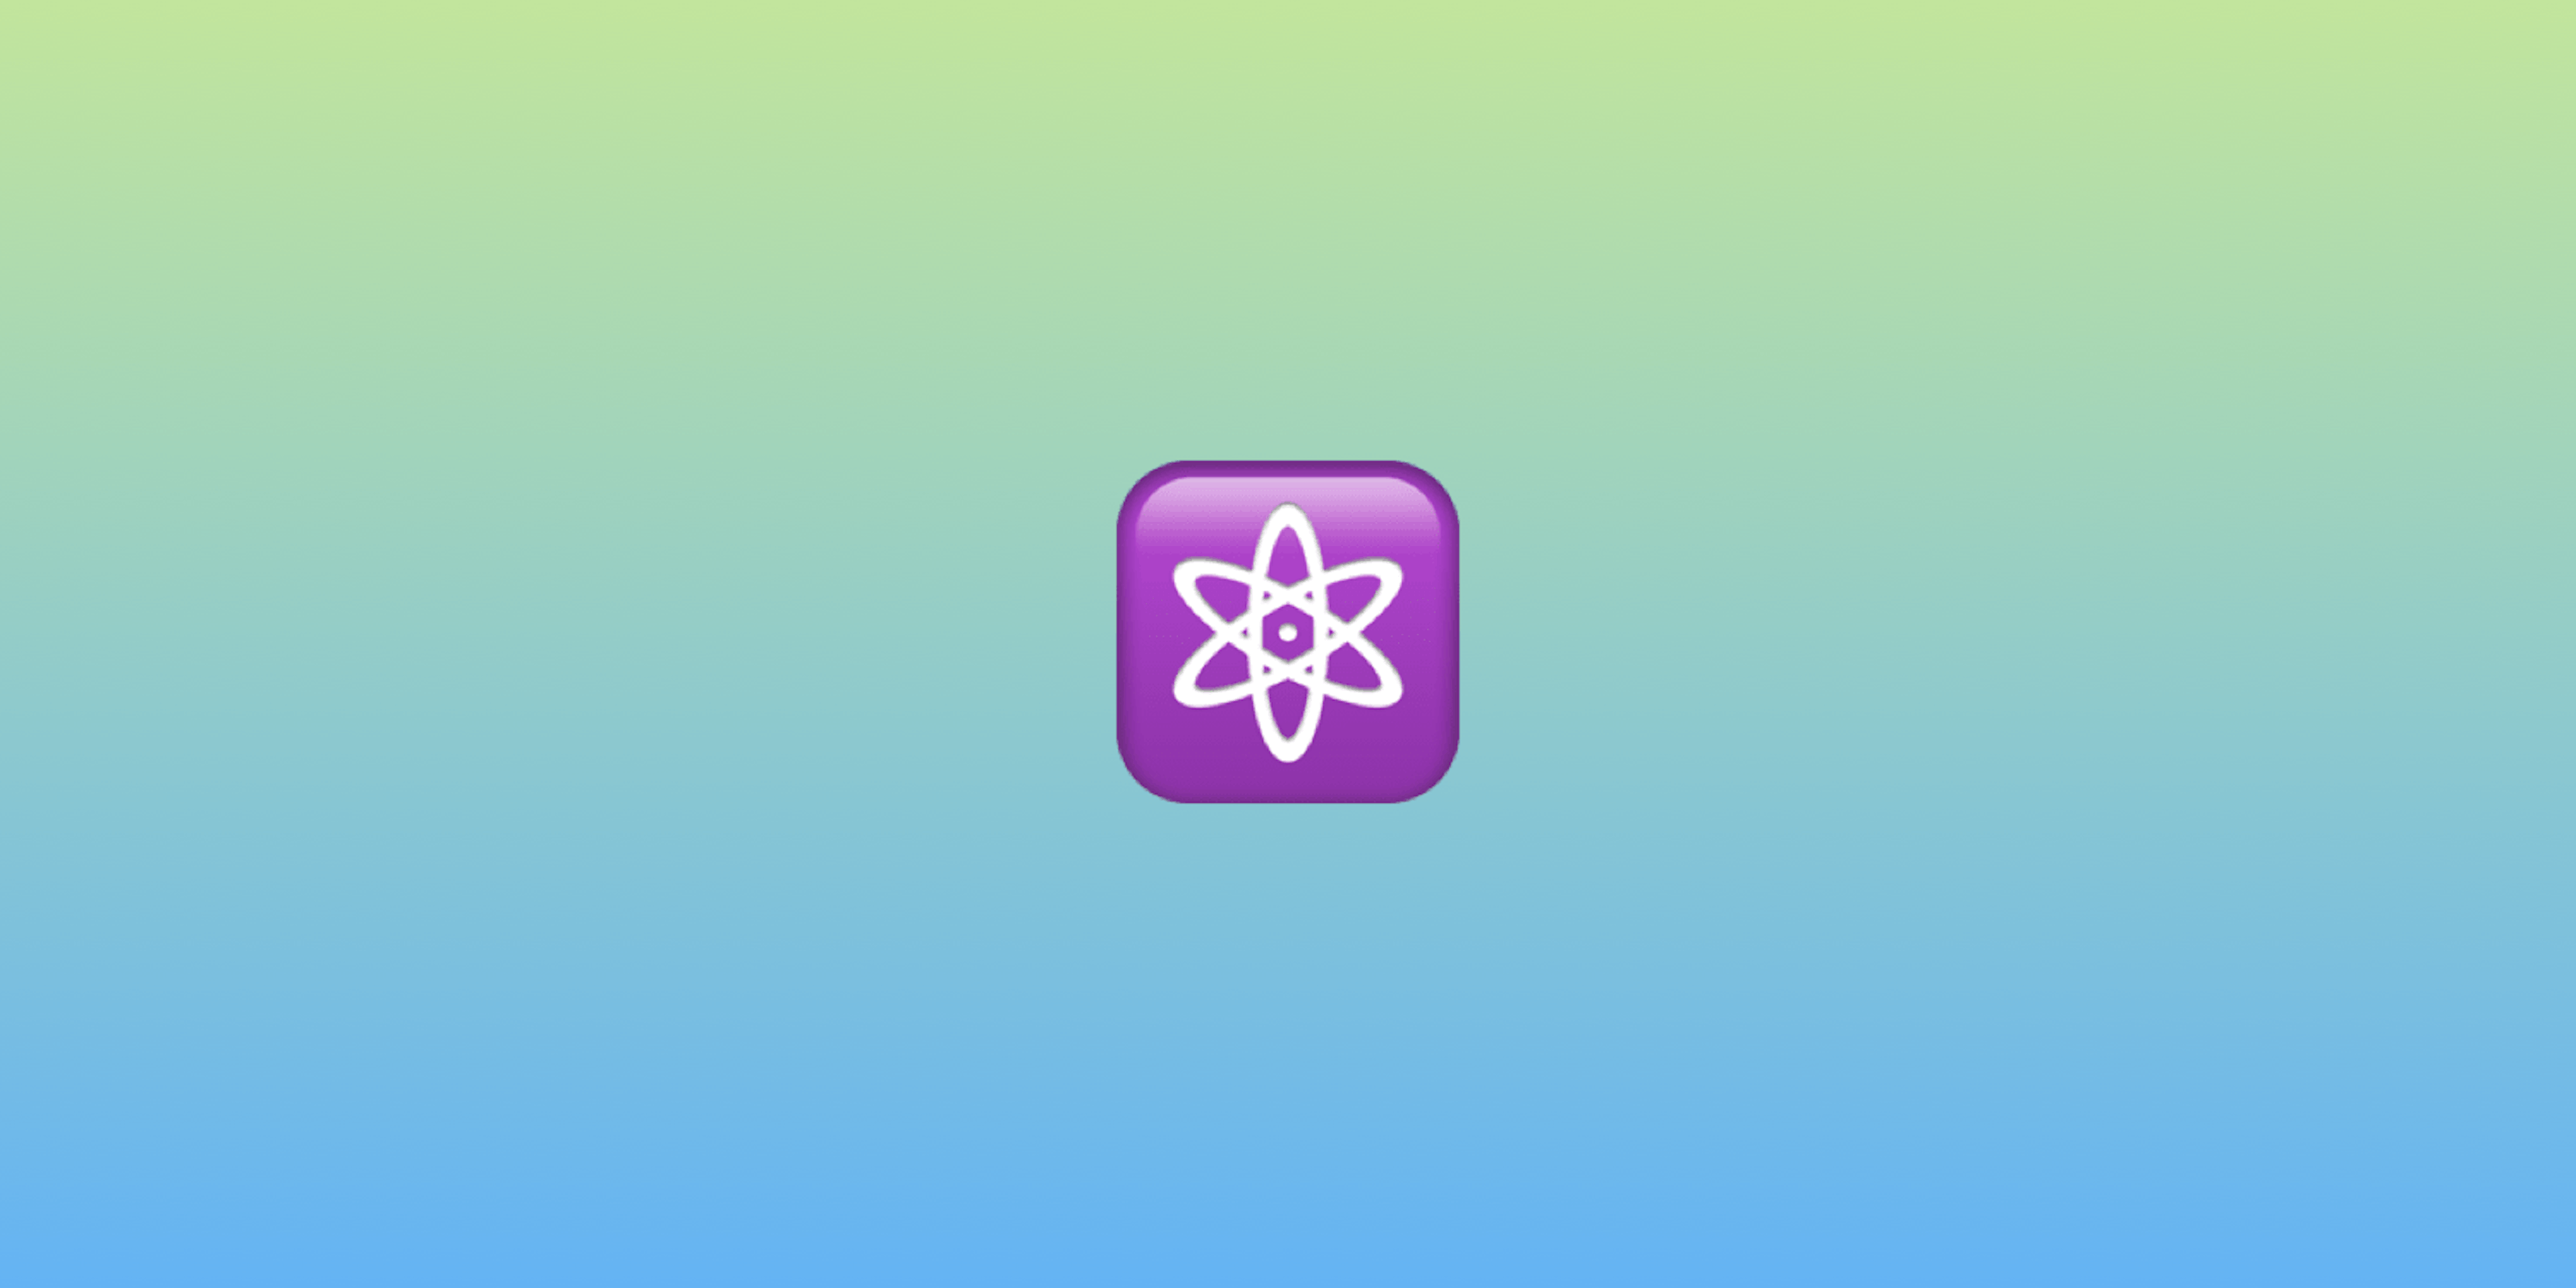 Driving towards a universal navigation strategy in React